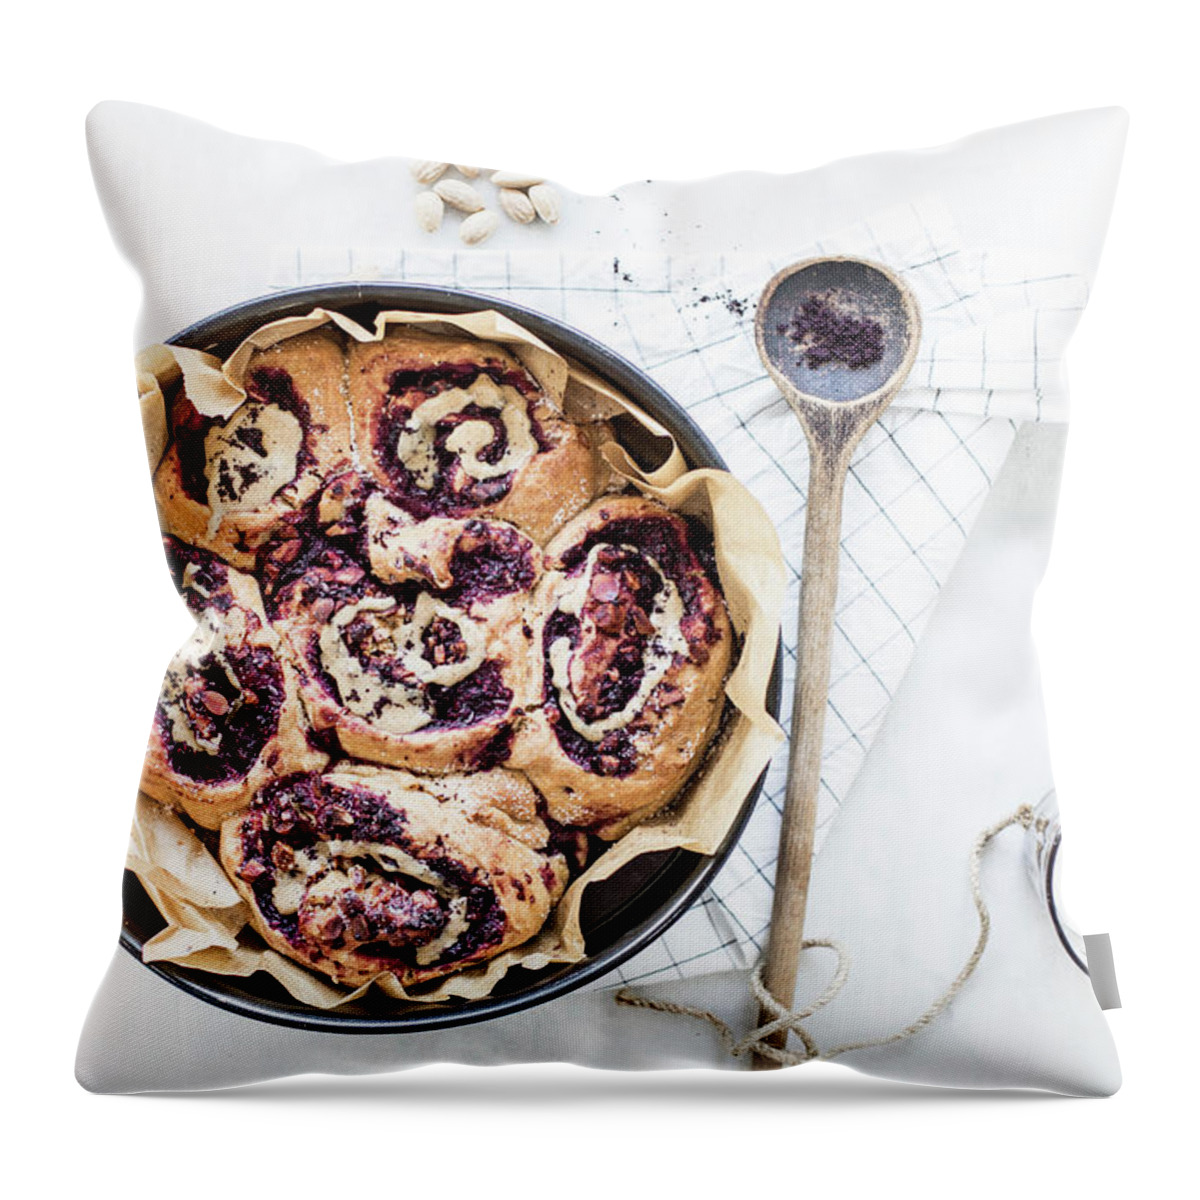 Ip_12548514 Throw Pillow featuring the photograph Raspberry And Acai Buns With Hazelnuts And Nut Butter by Theveggiekitchen